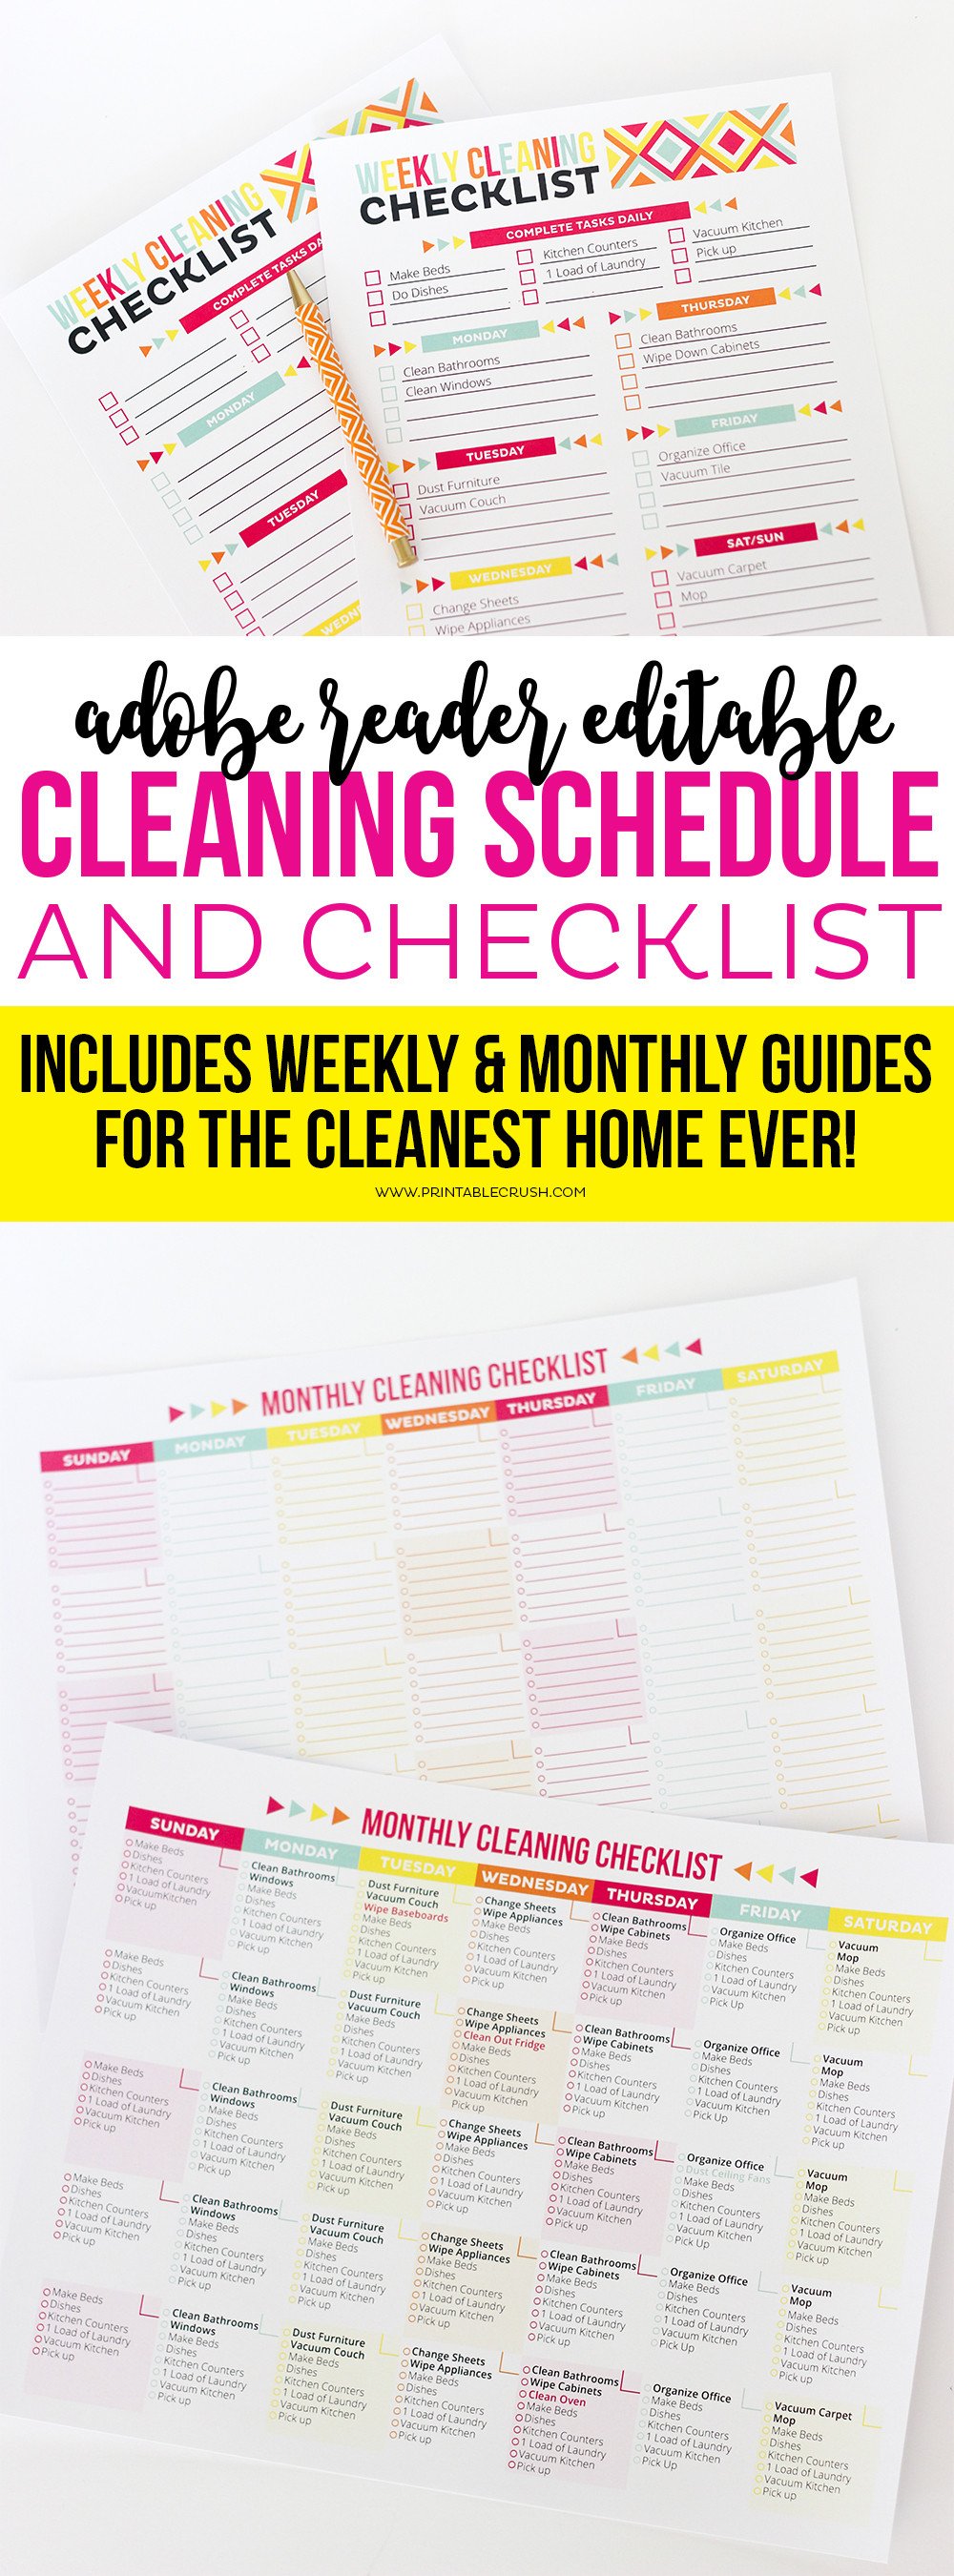 Editable Cleaning Schedule Template Editable Printable Cleaning Schedule and Checklist